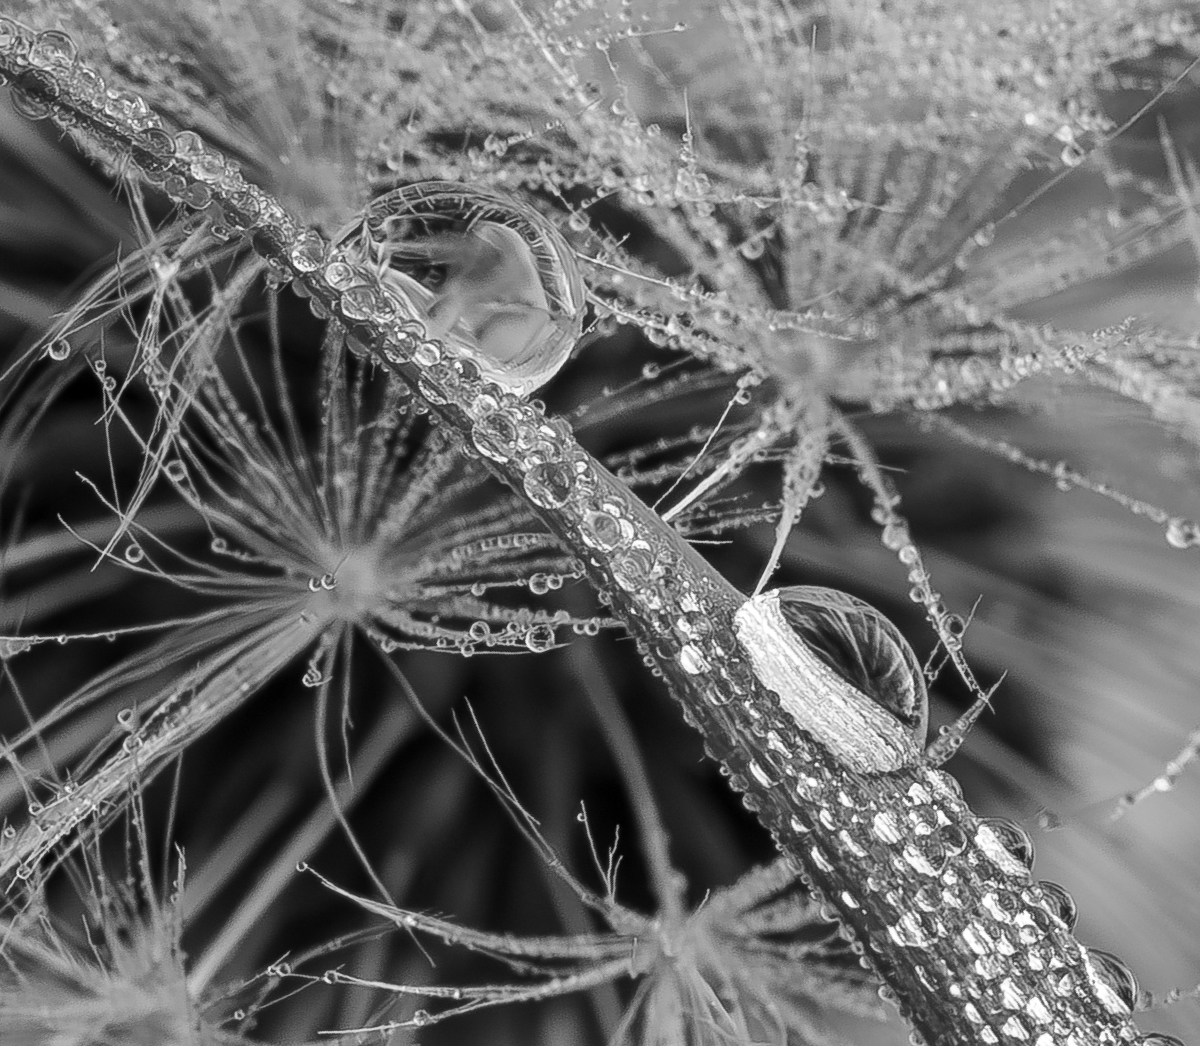 Trying to emulate @psychoticstate's Misty May Dandelion image with a black and white macro of a dewy blade of grass with some Dandelion parachute seeds as a backdrop. @BNW_Macro #blackandwhitemacro #macro #ThePhotoHour #macrophotography #blackandwhitephotography #MacroHour